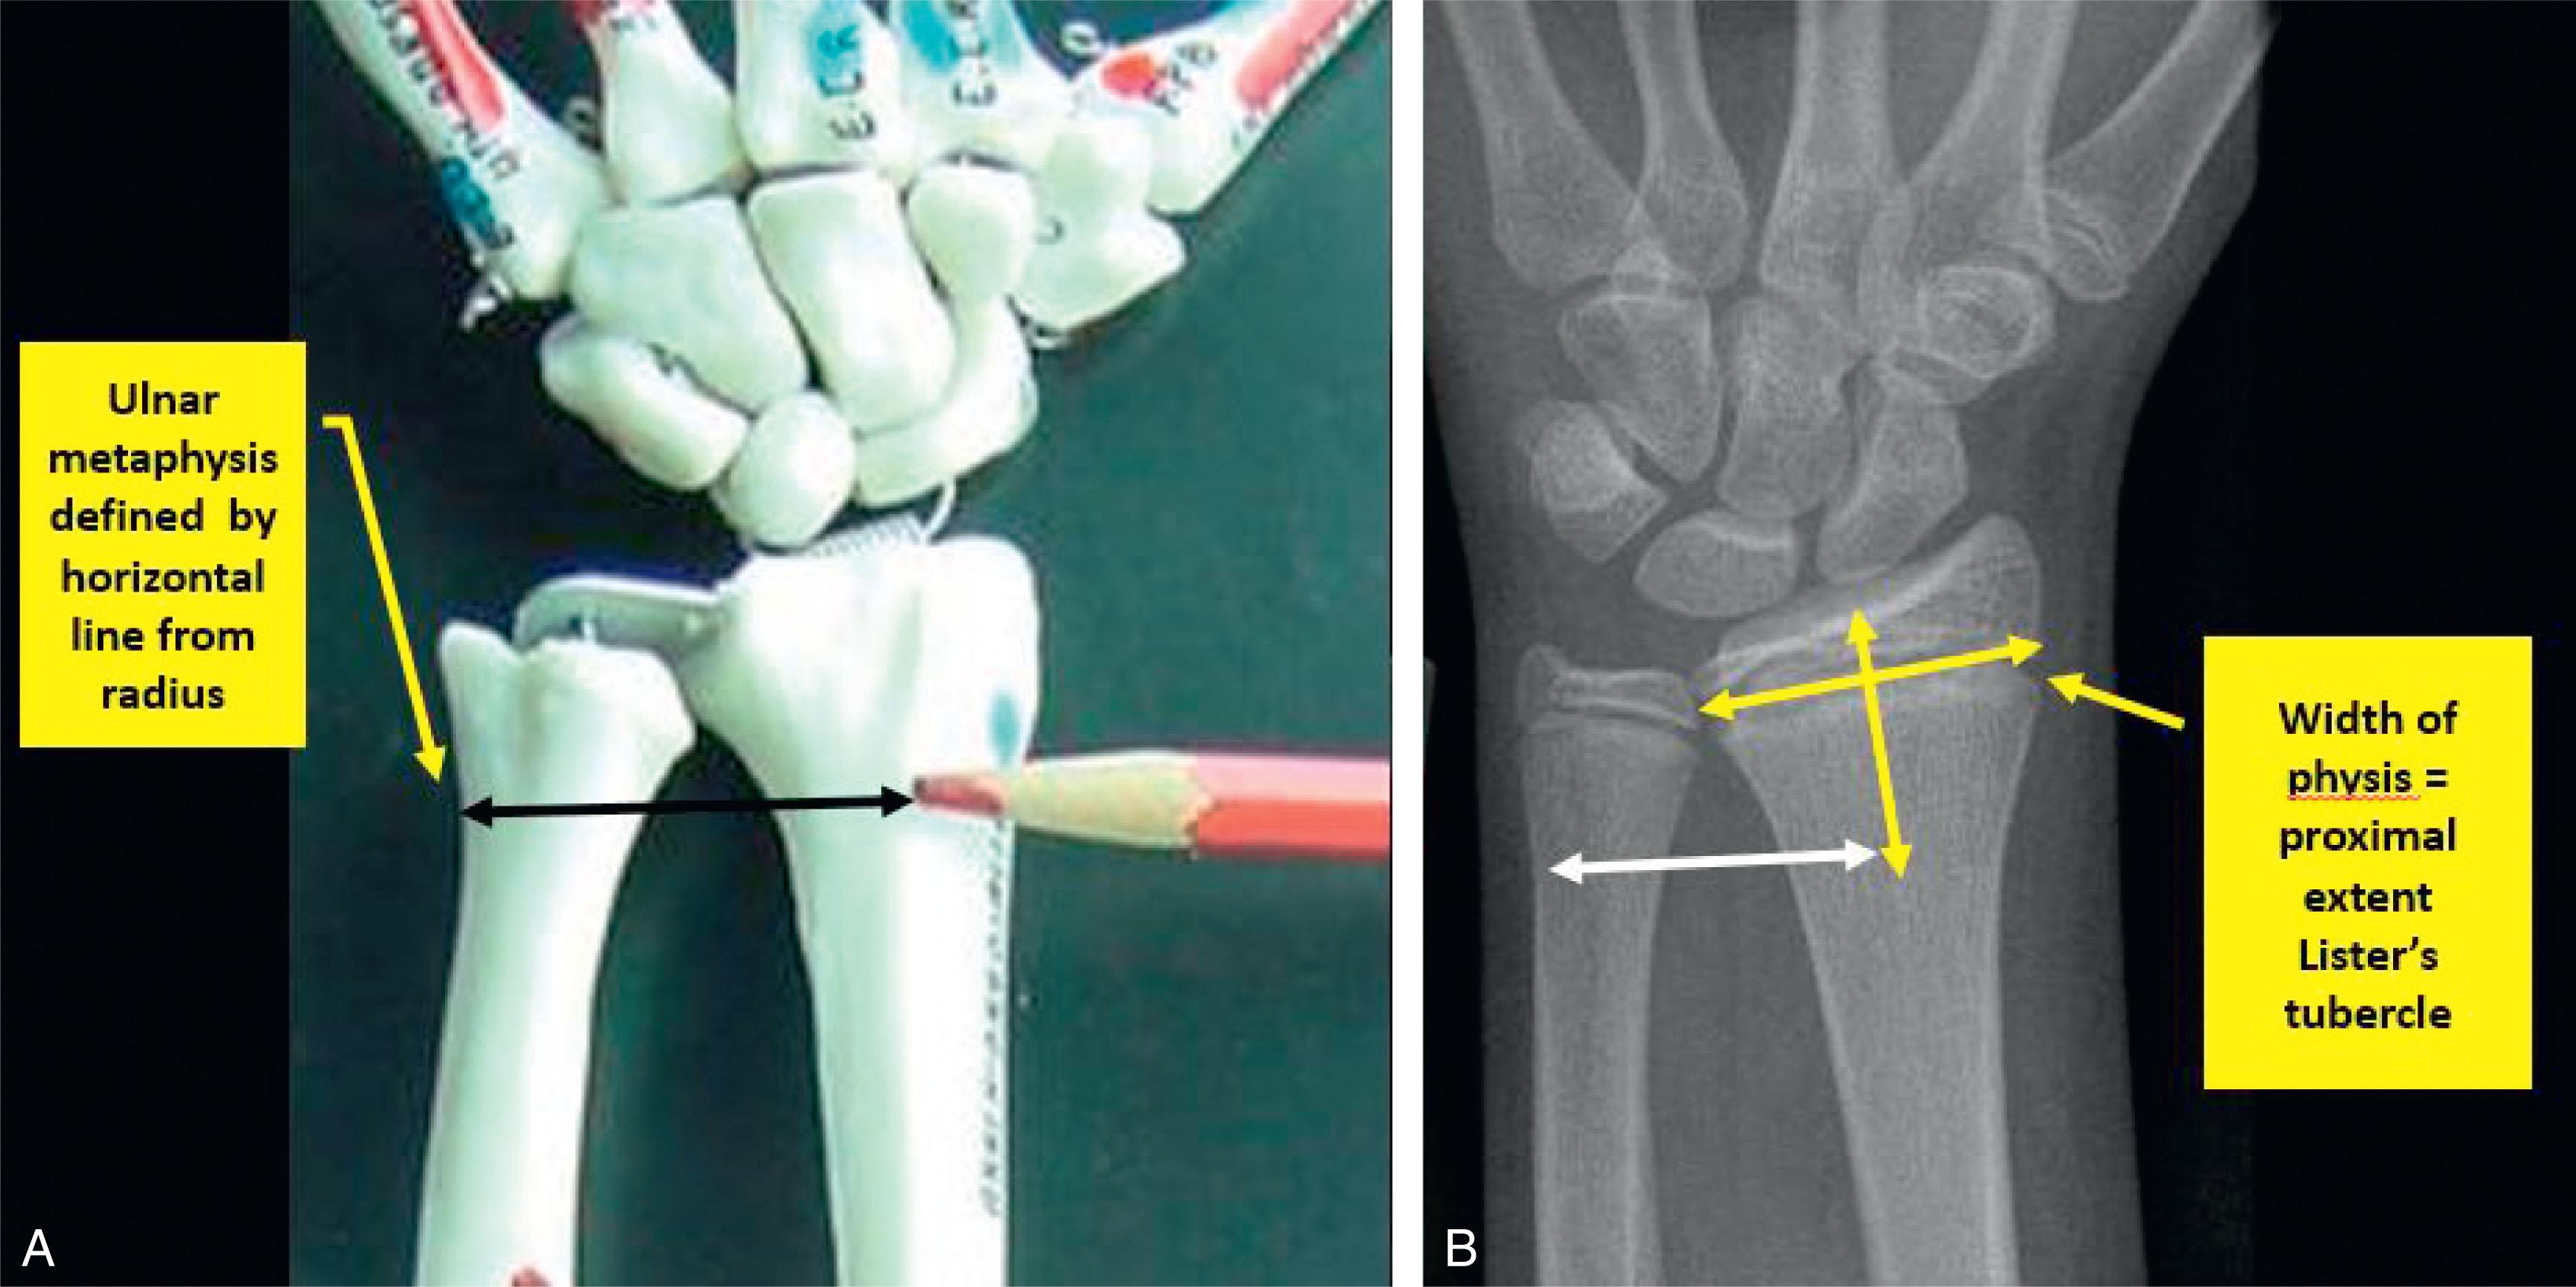 Fig. 6.1, Anatomic Definition of Distal Radius and Ulna Fractures. (A) Anatomic model showing key landmark of proximal extent of Lister’s tubercle. (B) Corresponding radiographic definition.